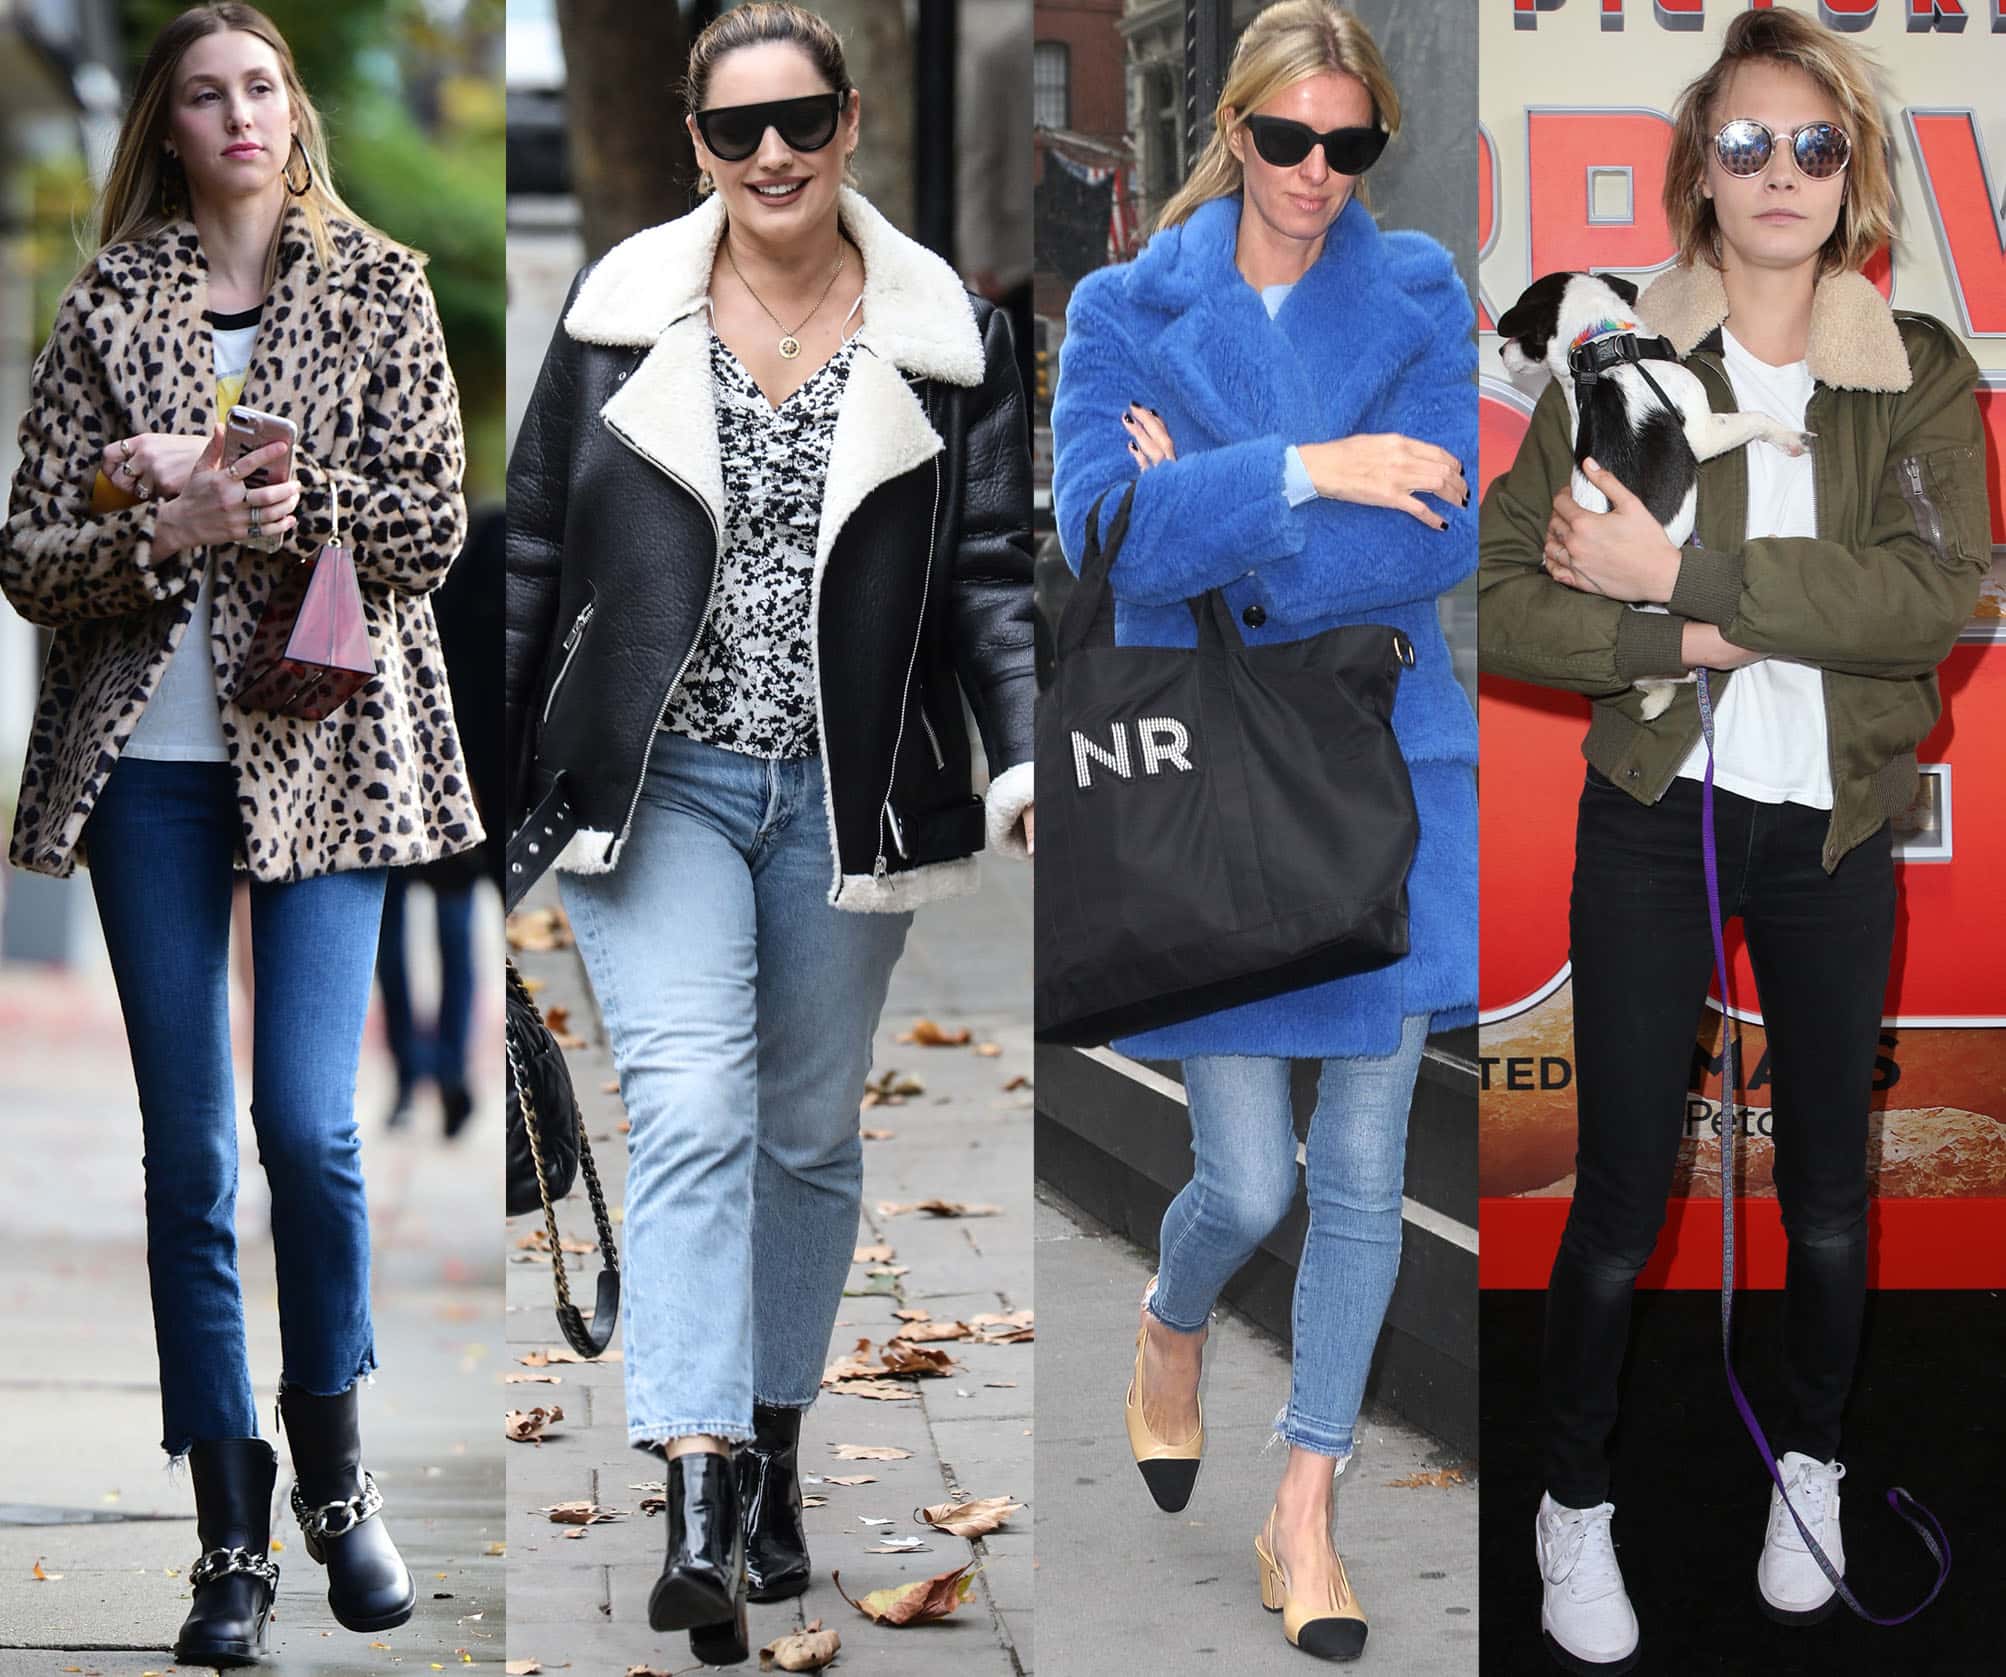 Fashion Icons in Casual Elegance: Whitney Port, Kelly Brook, Nicky Hilton, and Cara Delevingne showcase the timeless trend of pairing fleece jackets with jeans, epitomizing effortless style